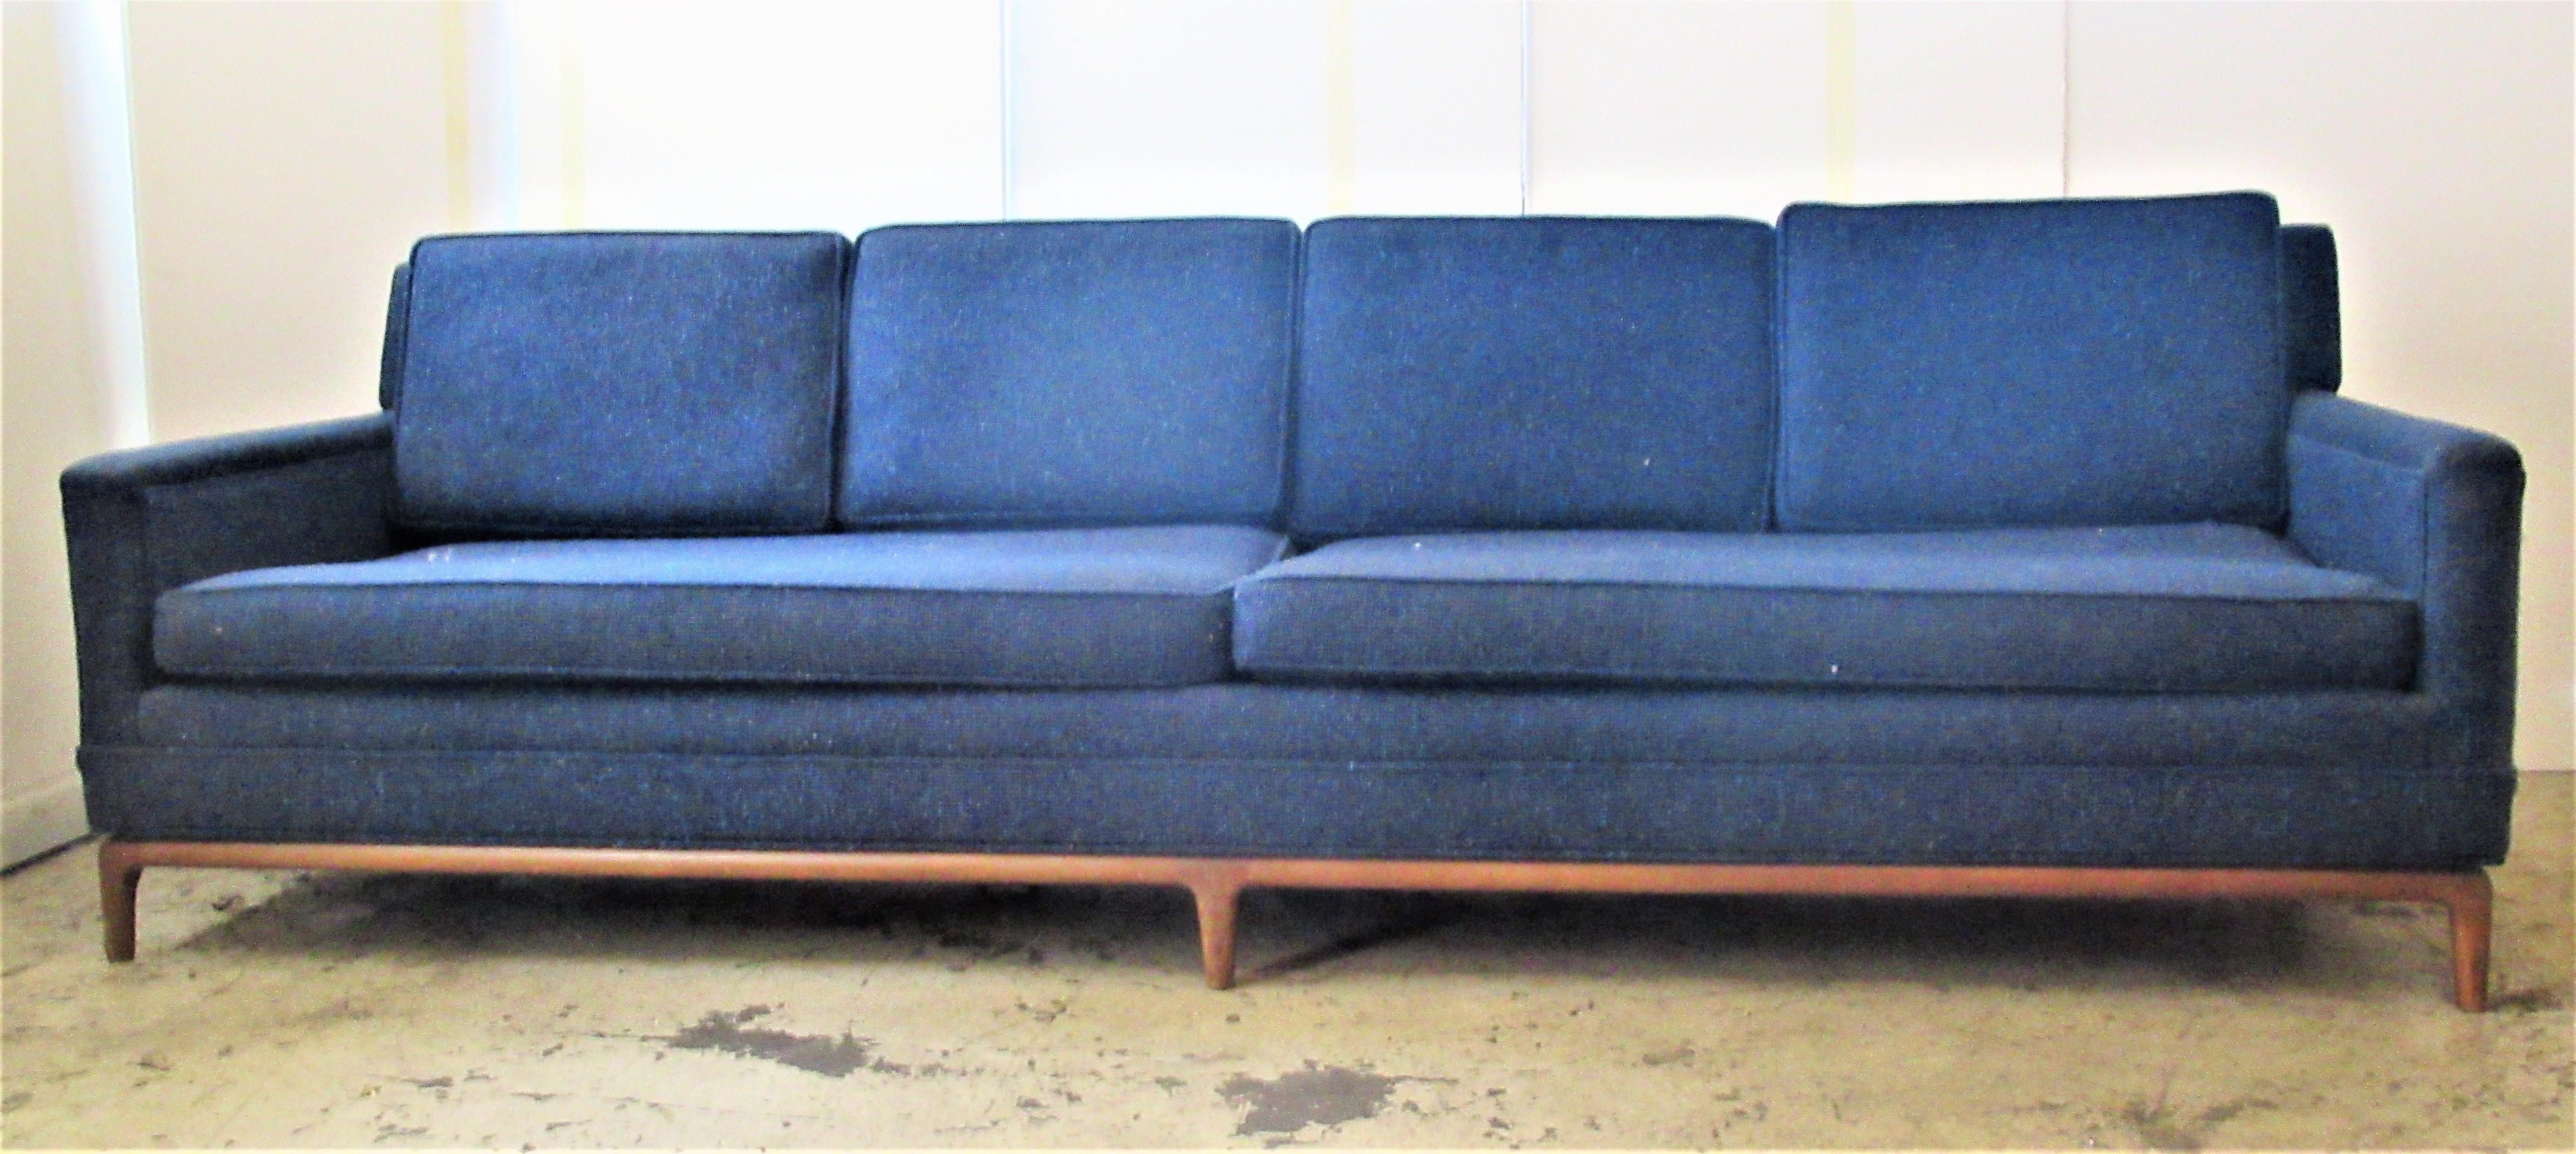 A very well built good quality all original period Mid-Century Modern eight foot elongated form sofa with lower full wraparound walnut frame having six tapered legs. Attributed to T.H. Robsjohn - Gibbings for Widdicomb. There is no label present.